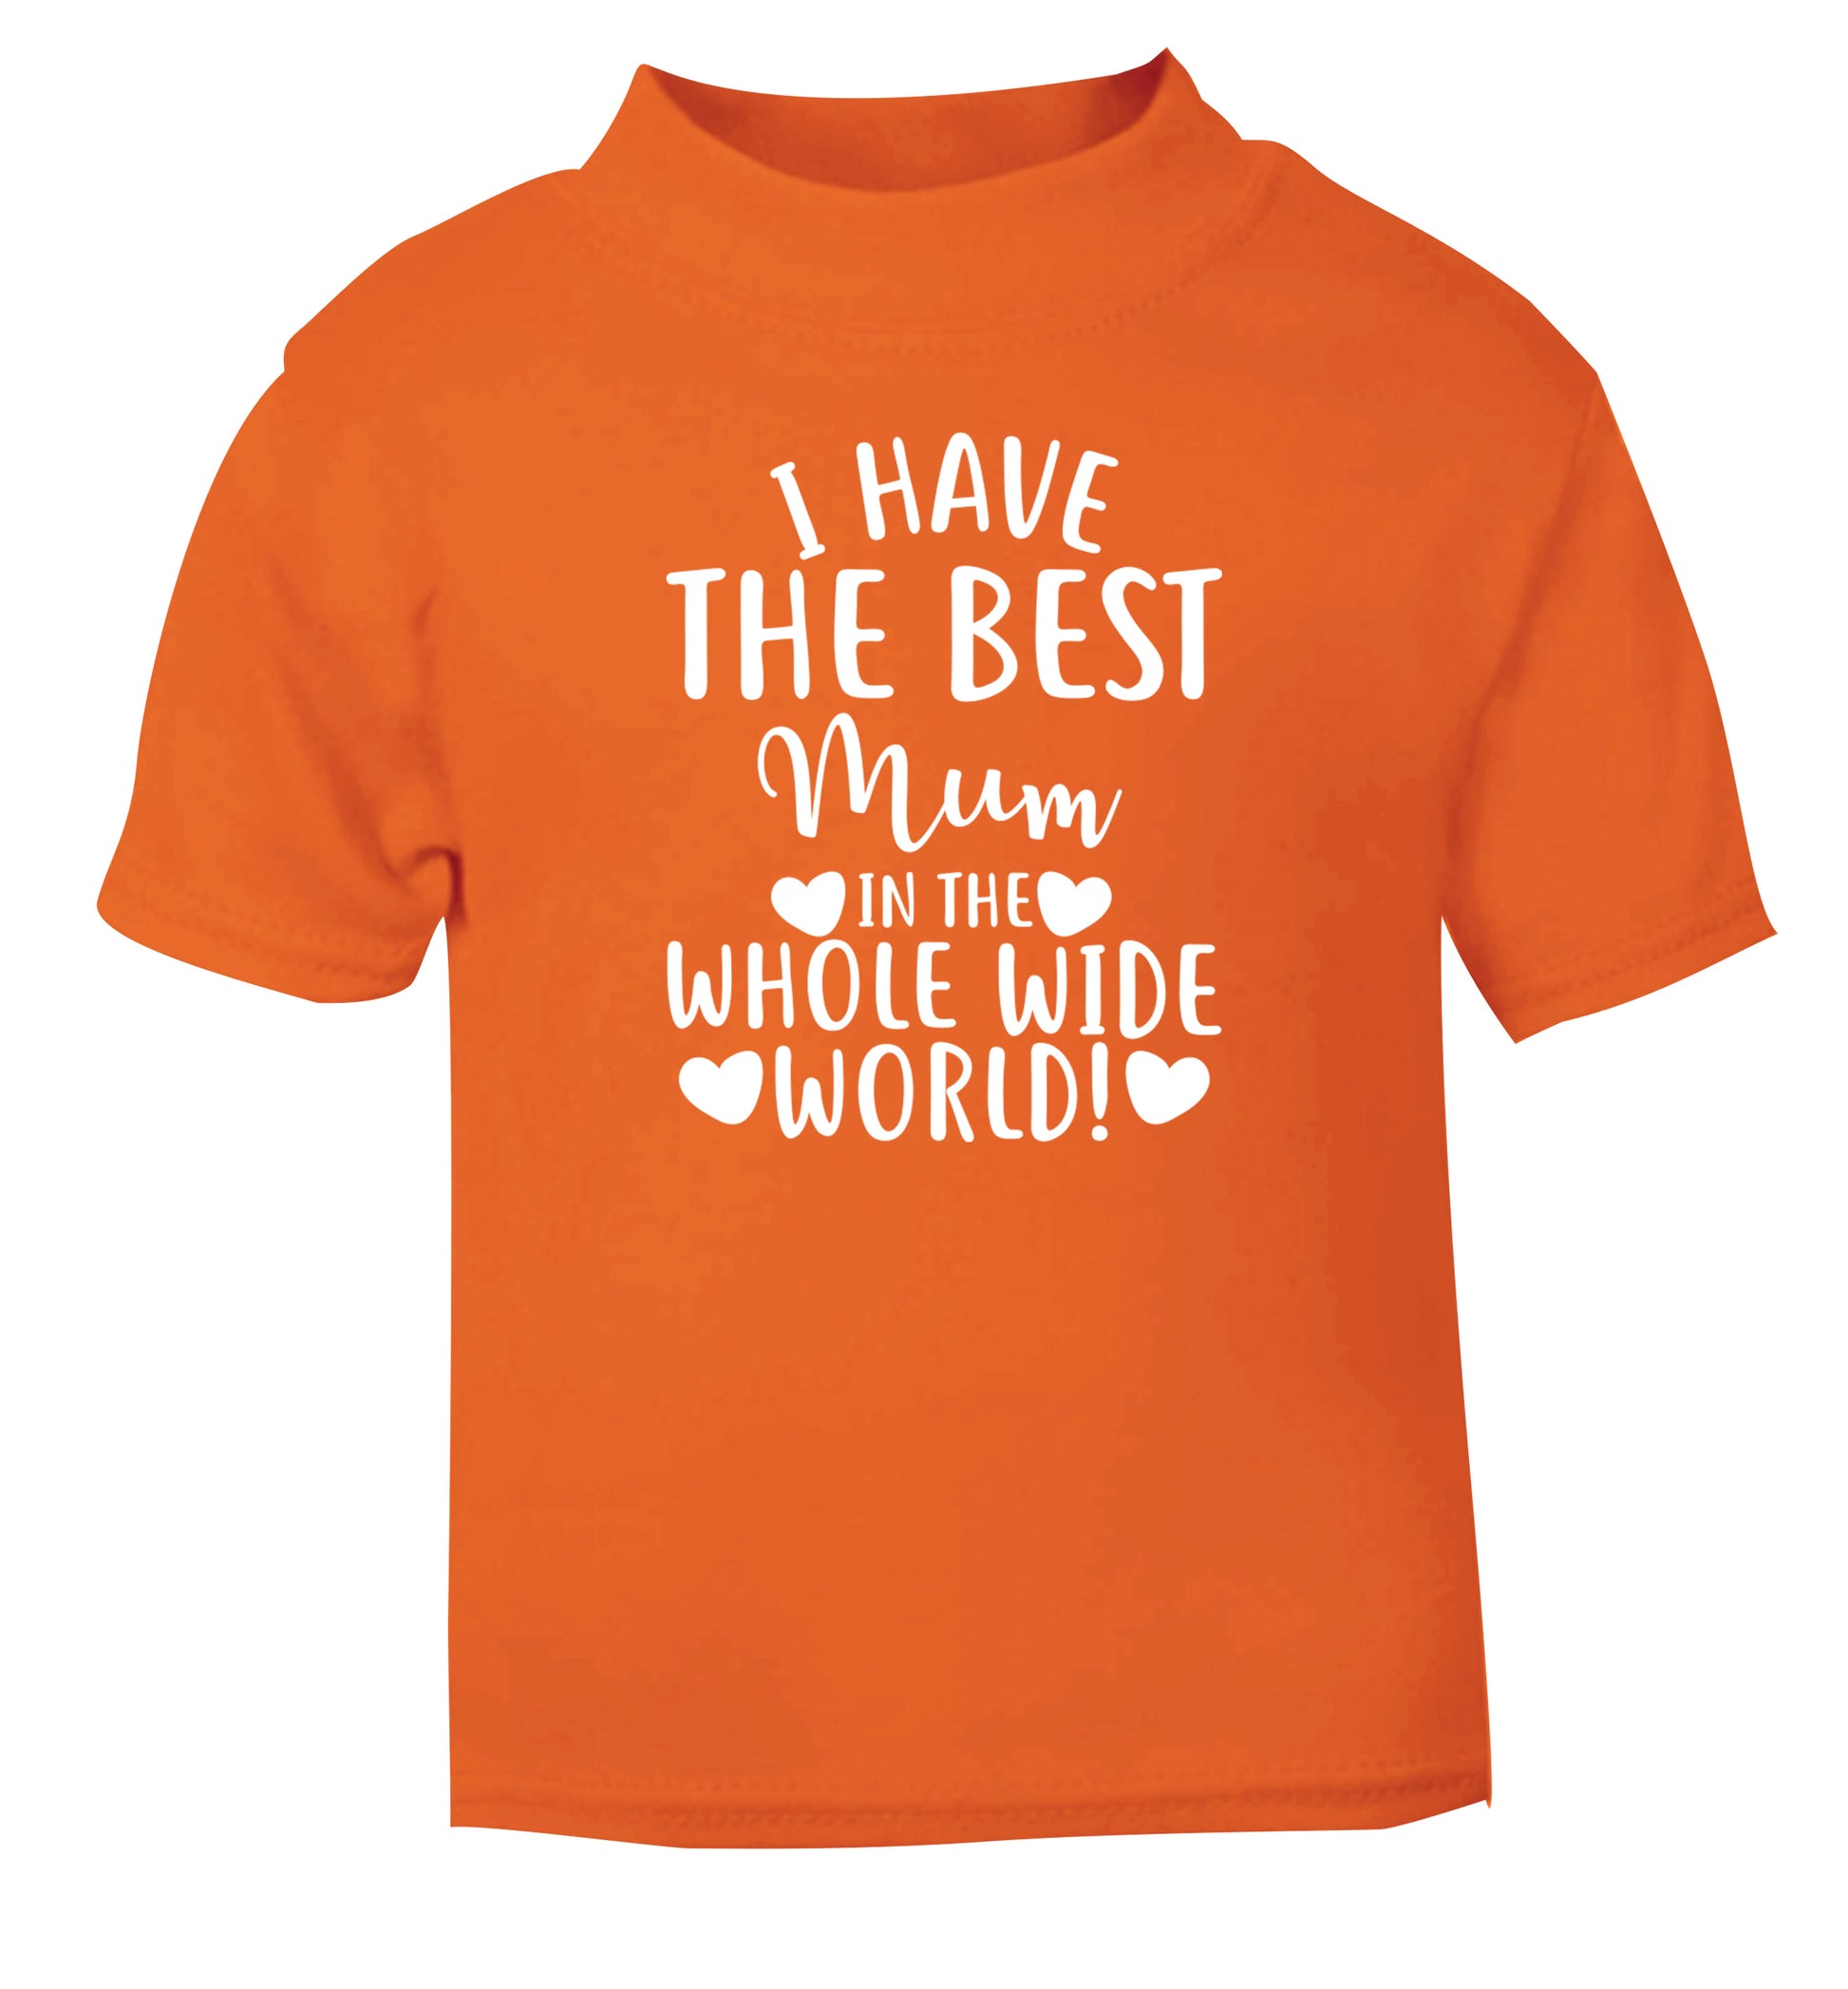 I have the best mum in the whole wide world! orange Baby Toddler Tshirt 2 Years